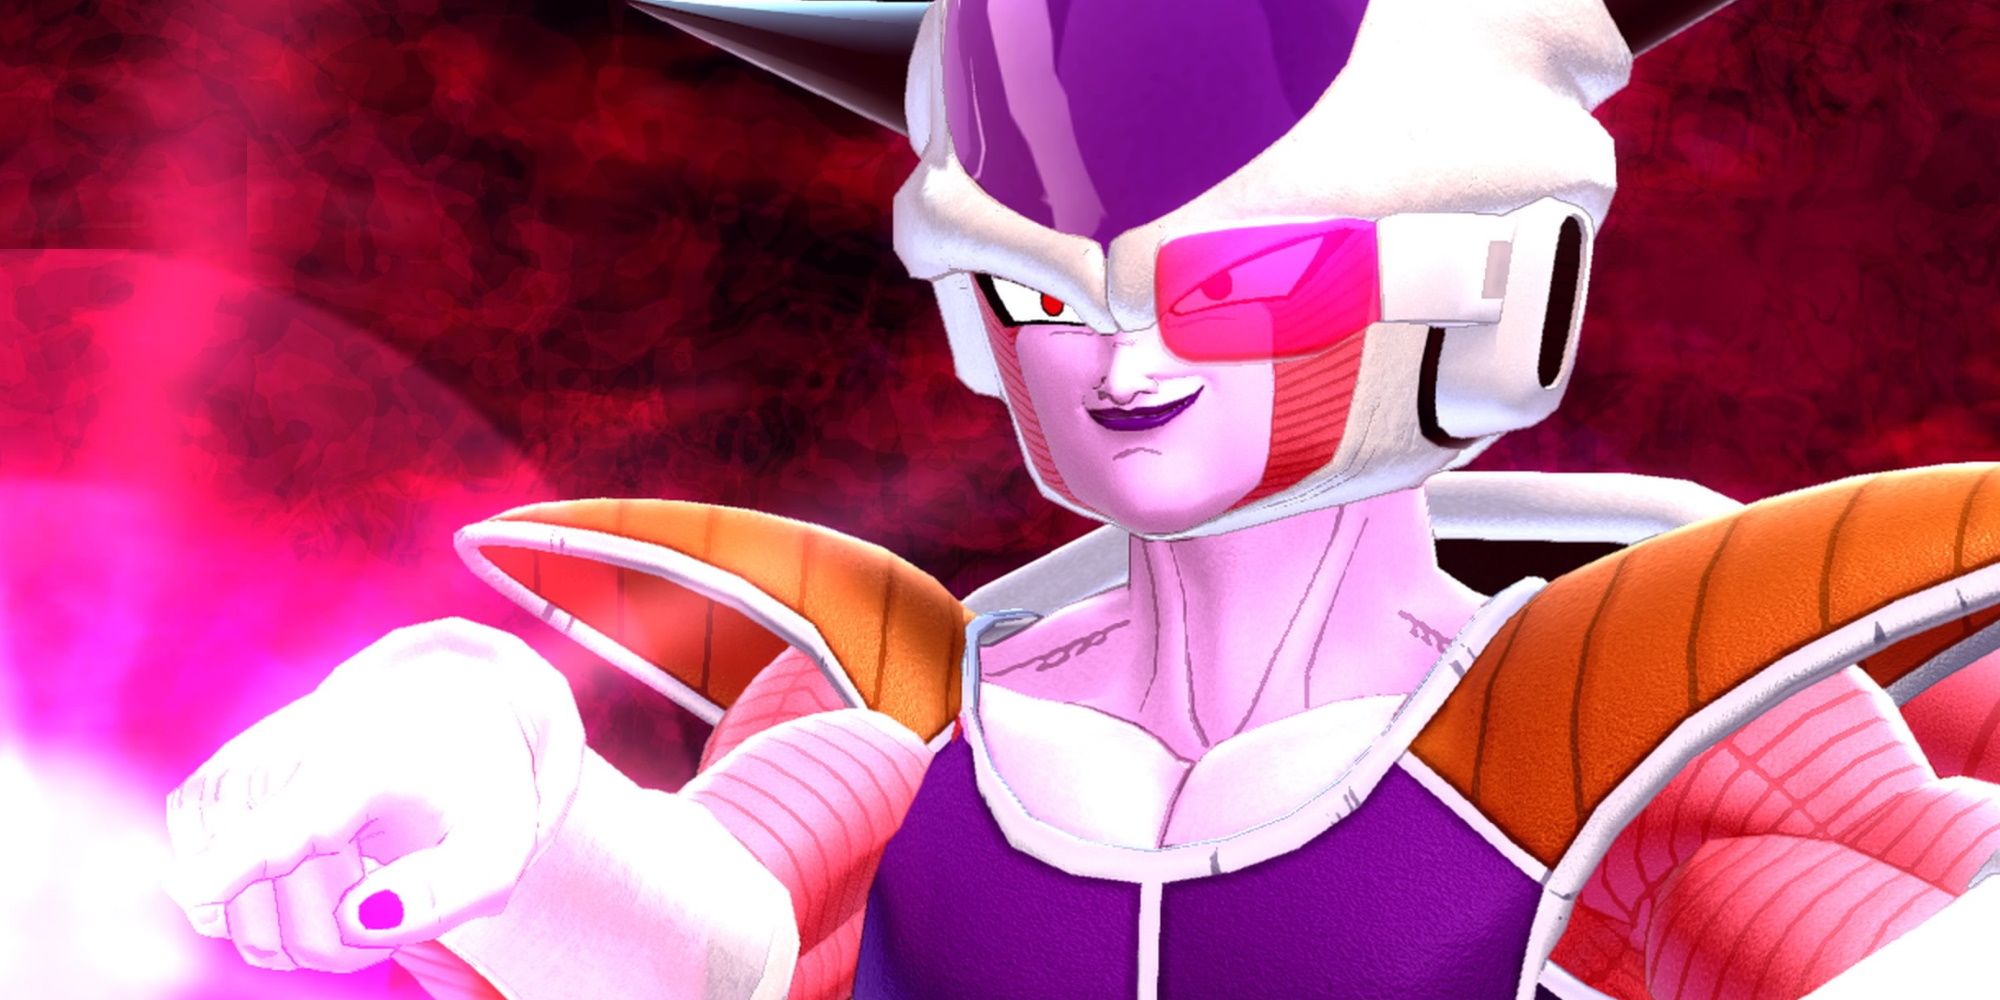 frieza-1st-form-frieza-saga-mll-redesign-by-mad-54-on-deviantart